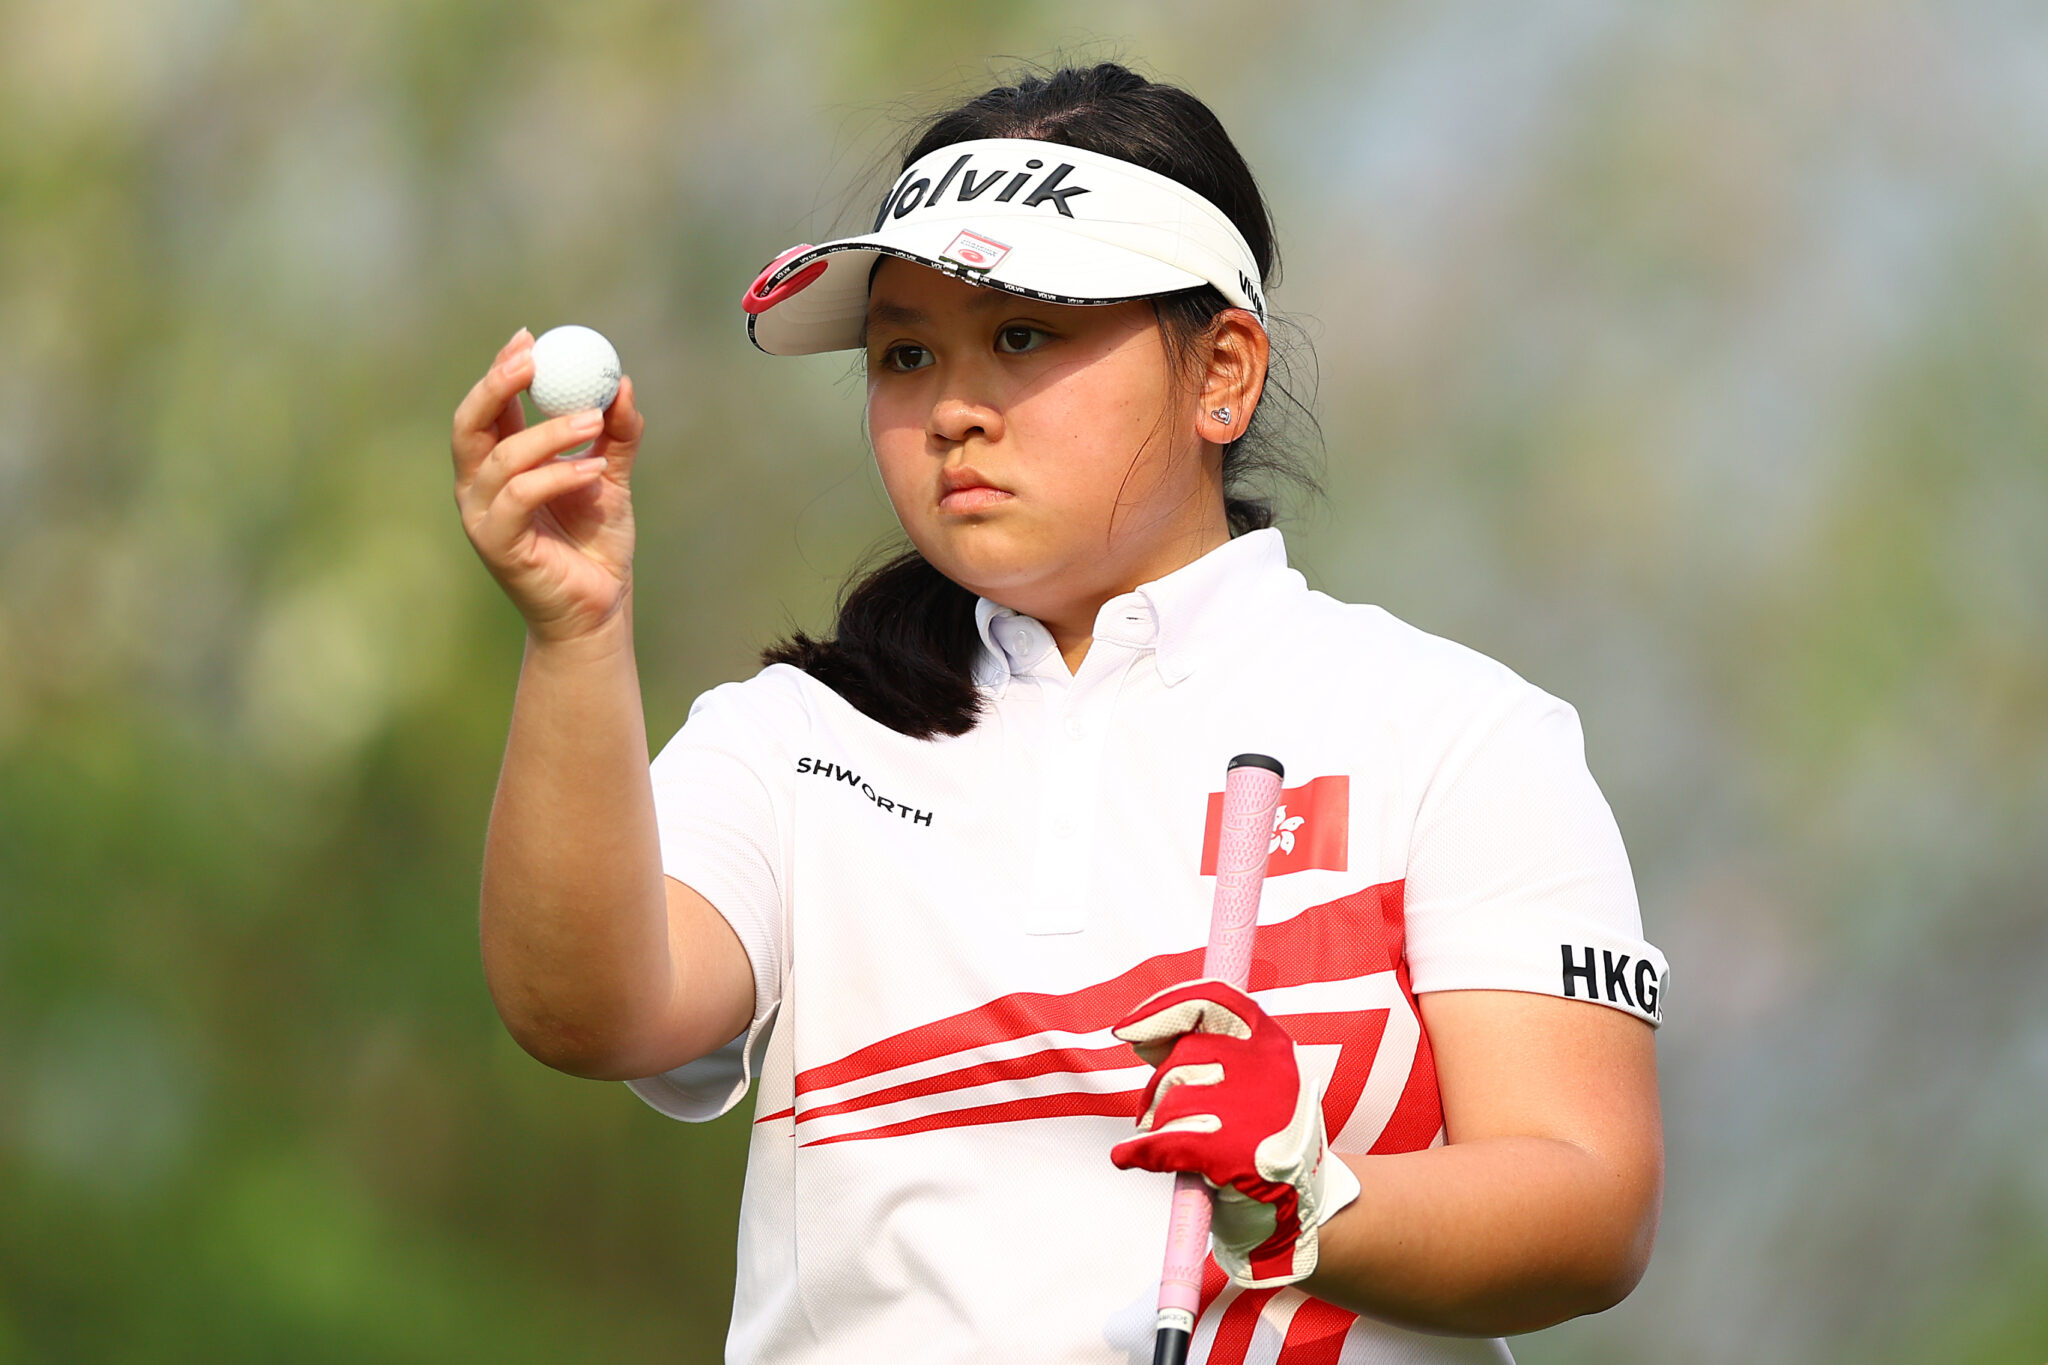 This 12-year-old golfer from Hong Kong is making waves in Scotland